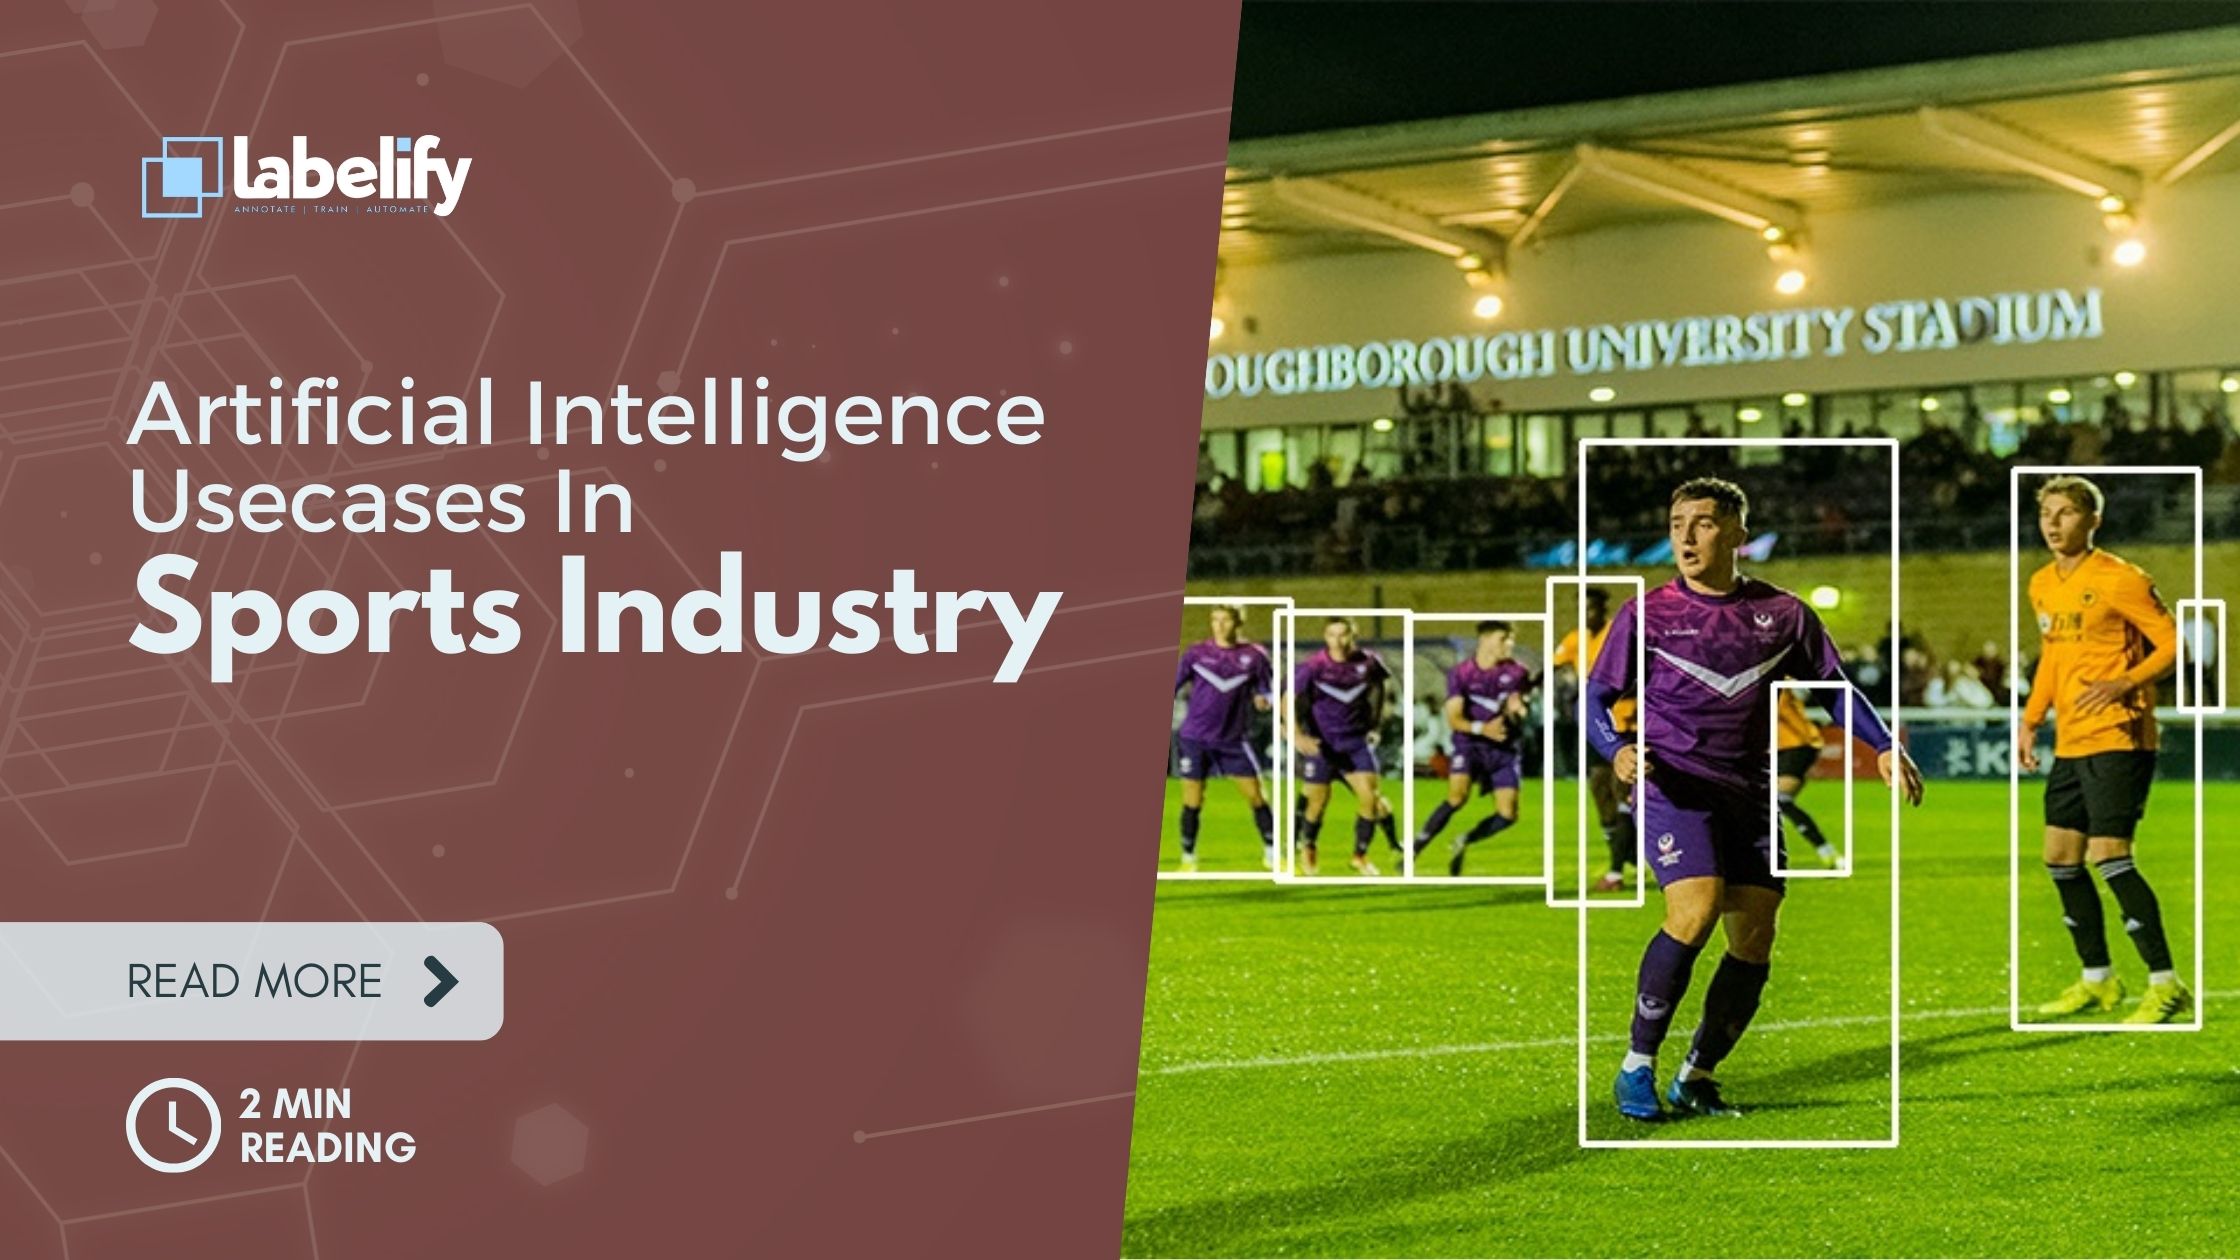 Artificial Intelligence Usecases in Sports Industry